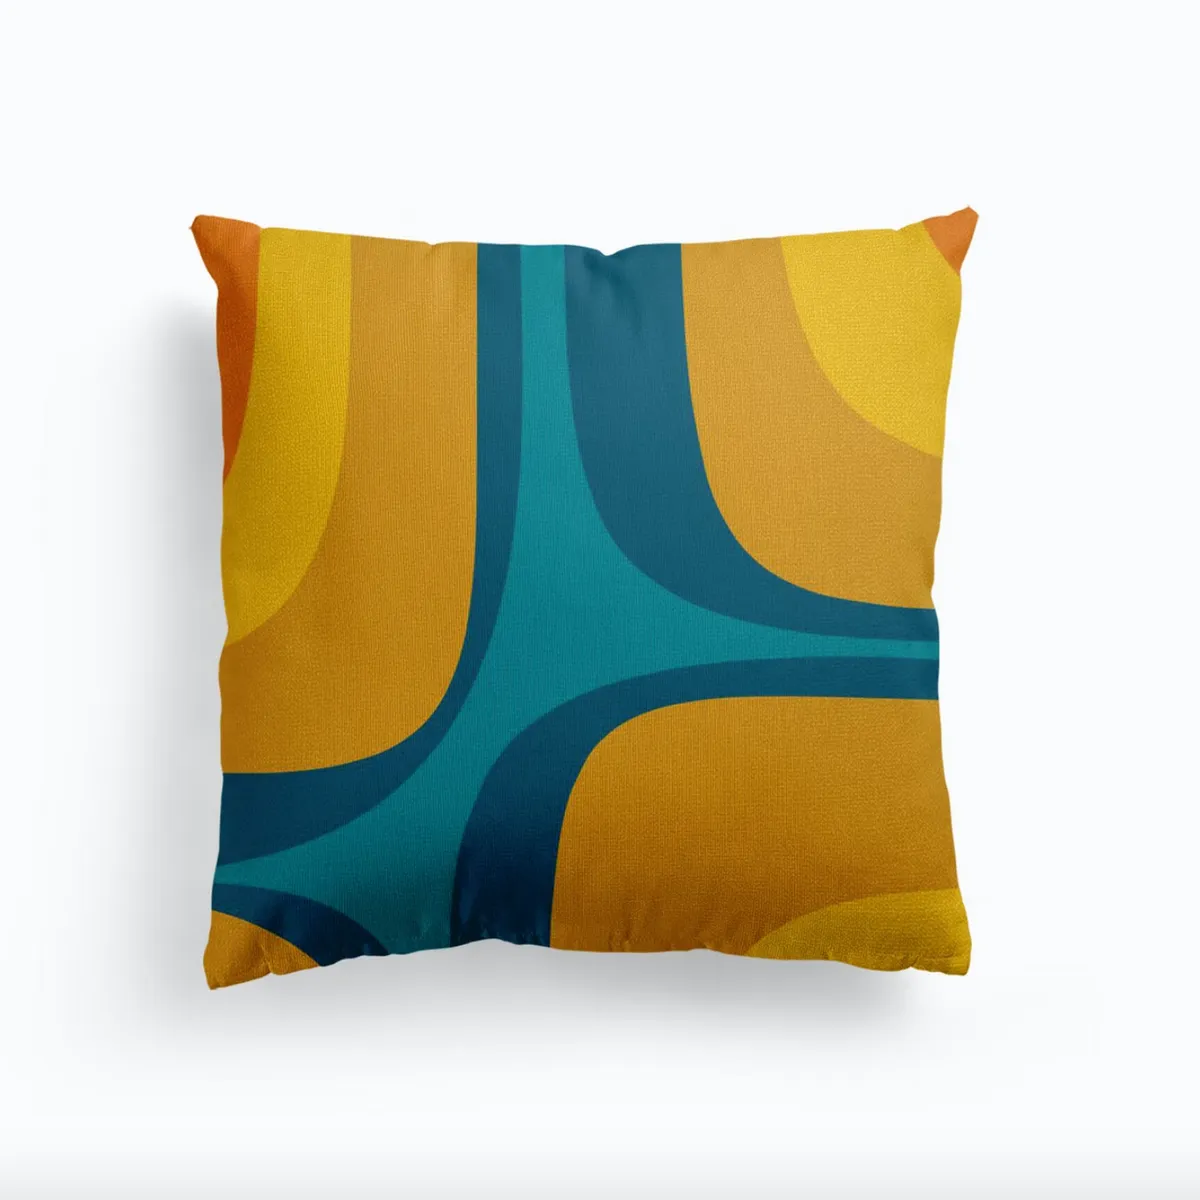 Teal and mustard cushions